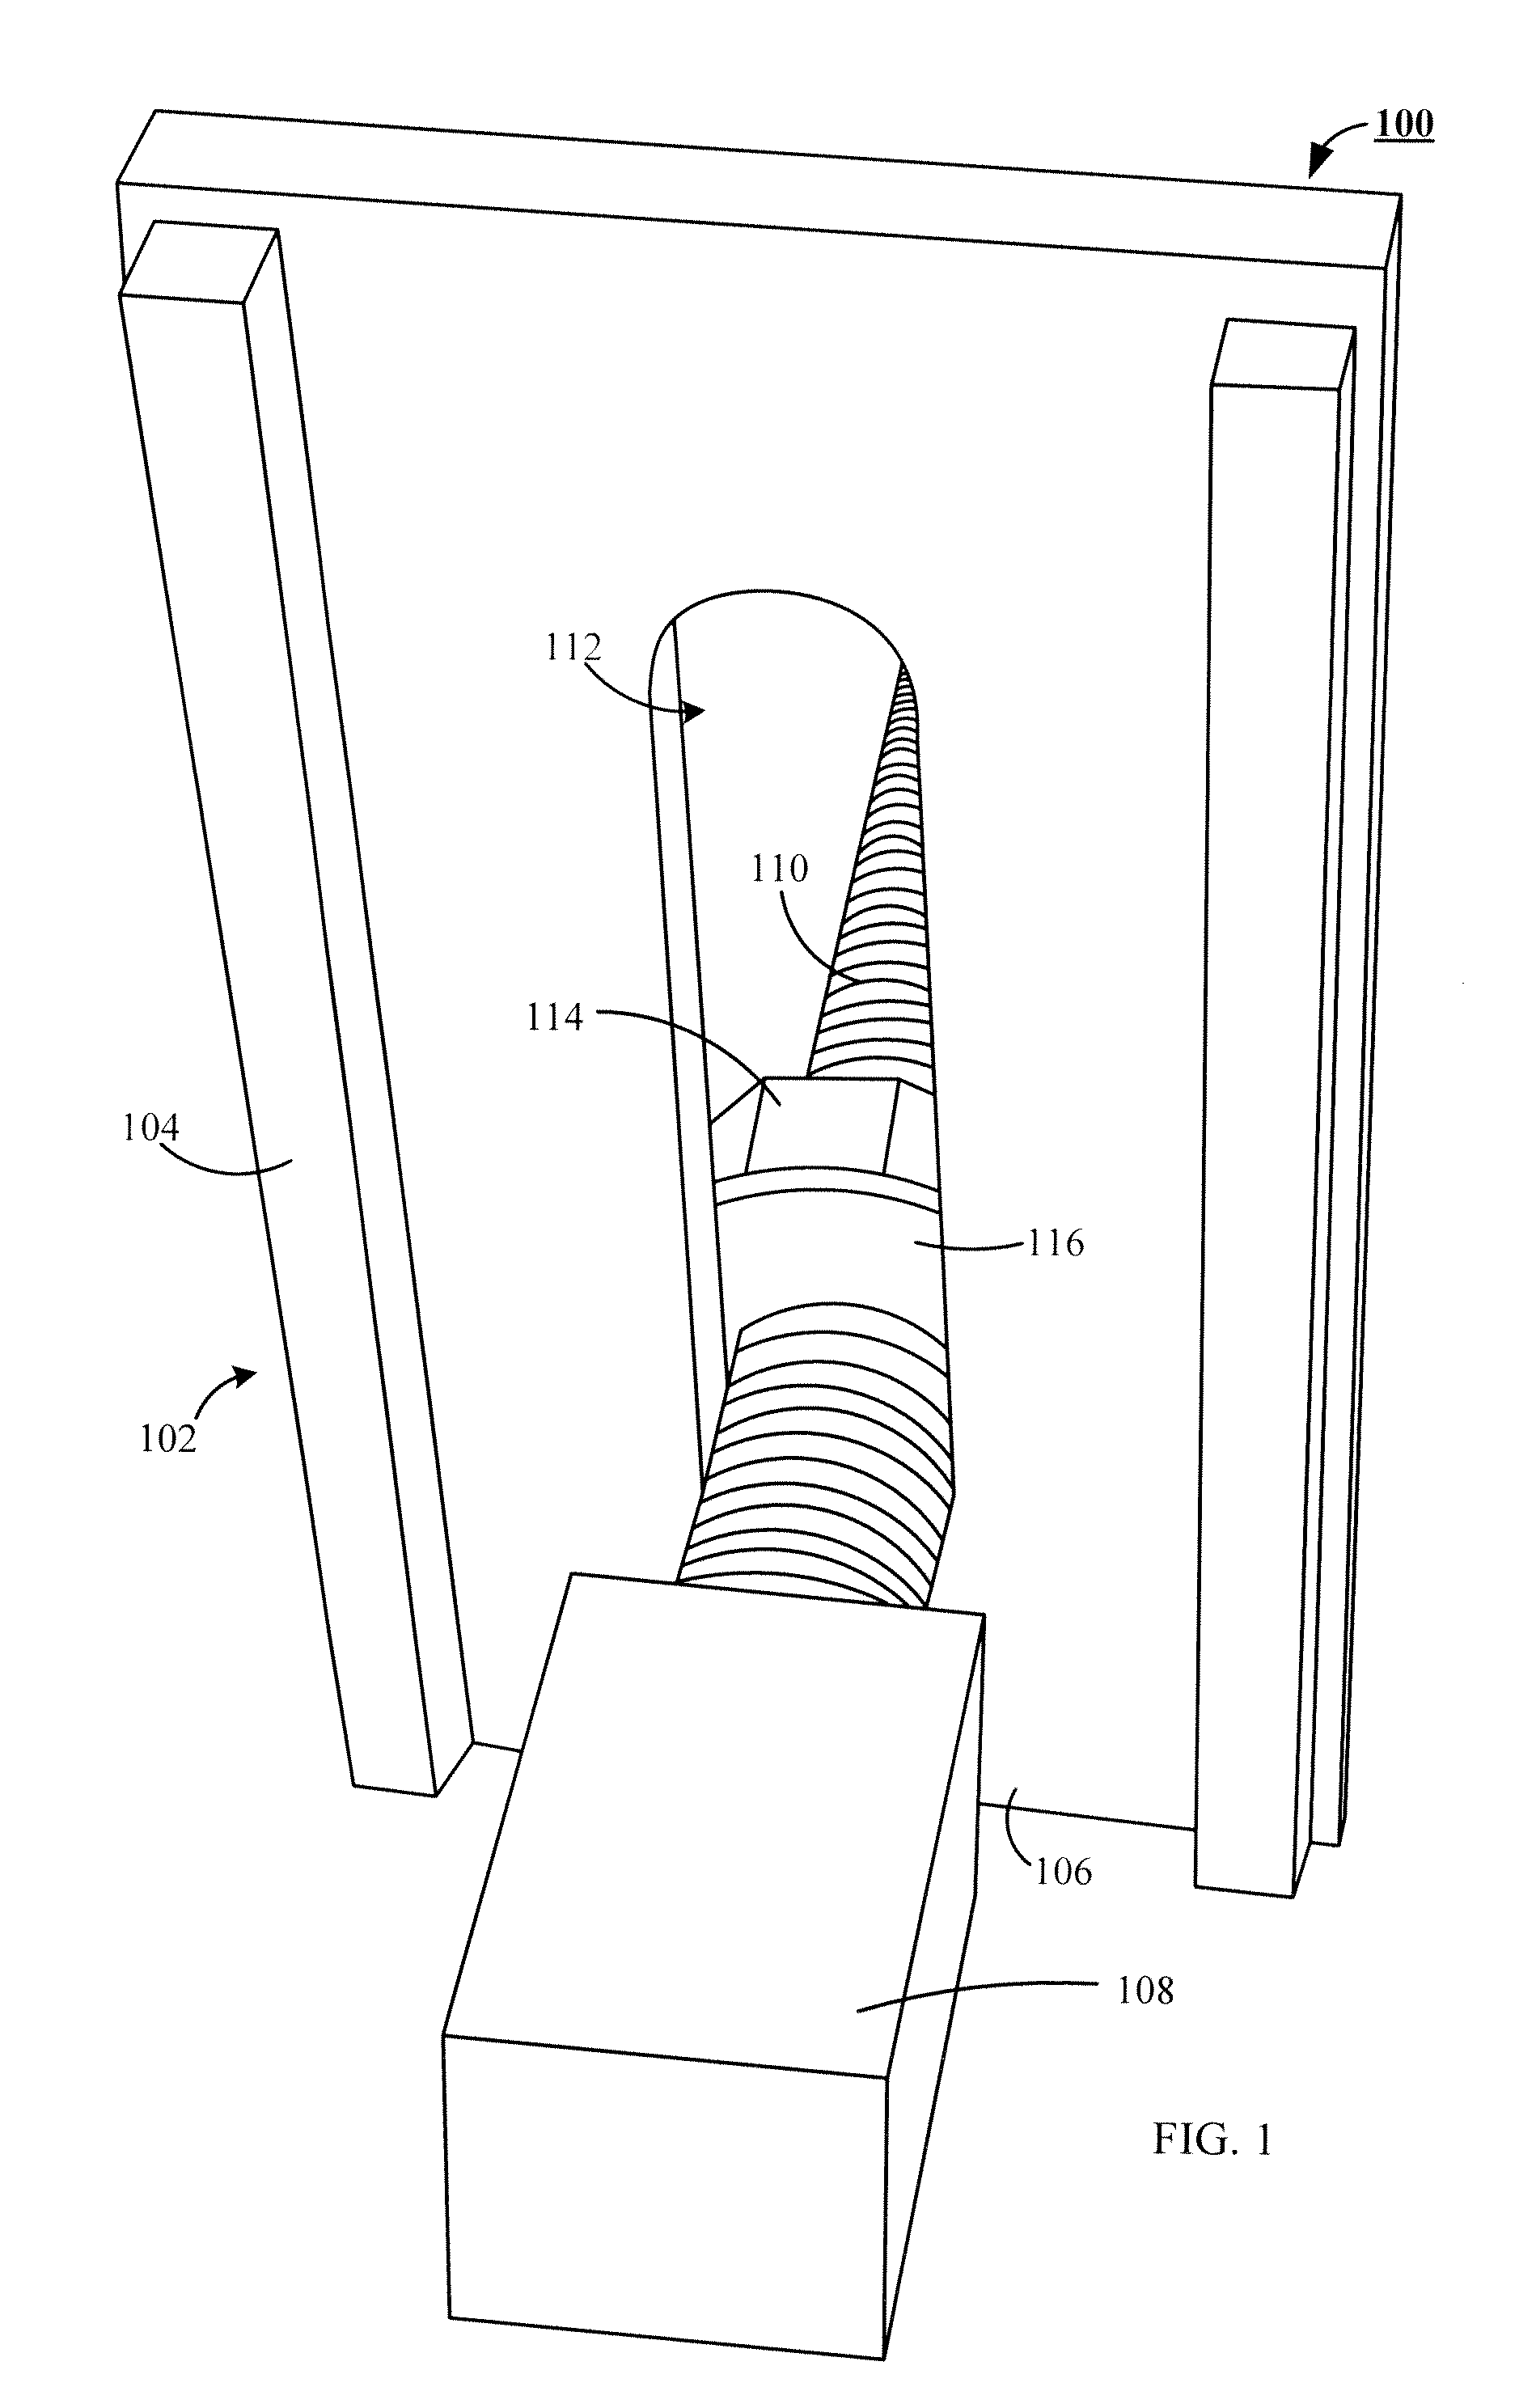 Method and apparatus for aligning a wind turbine generator